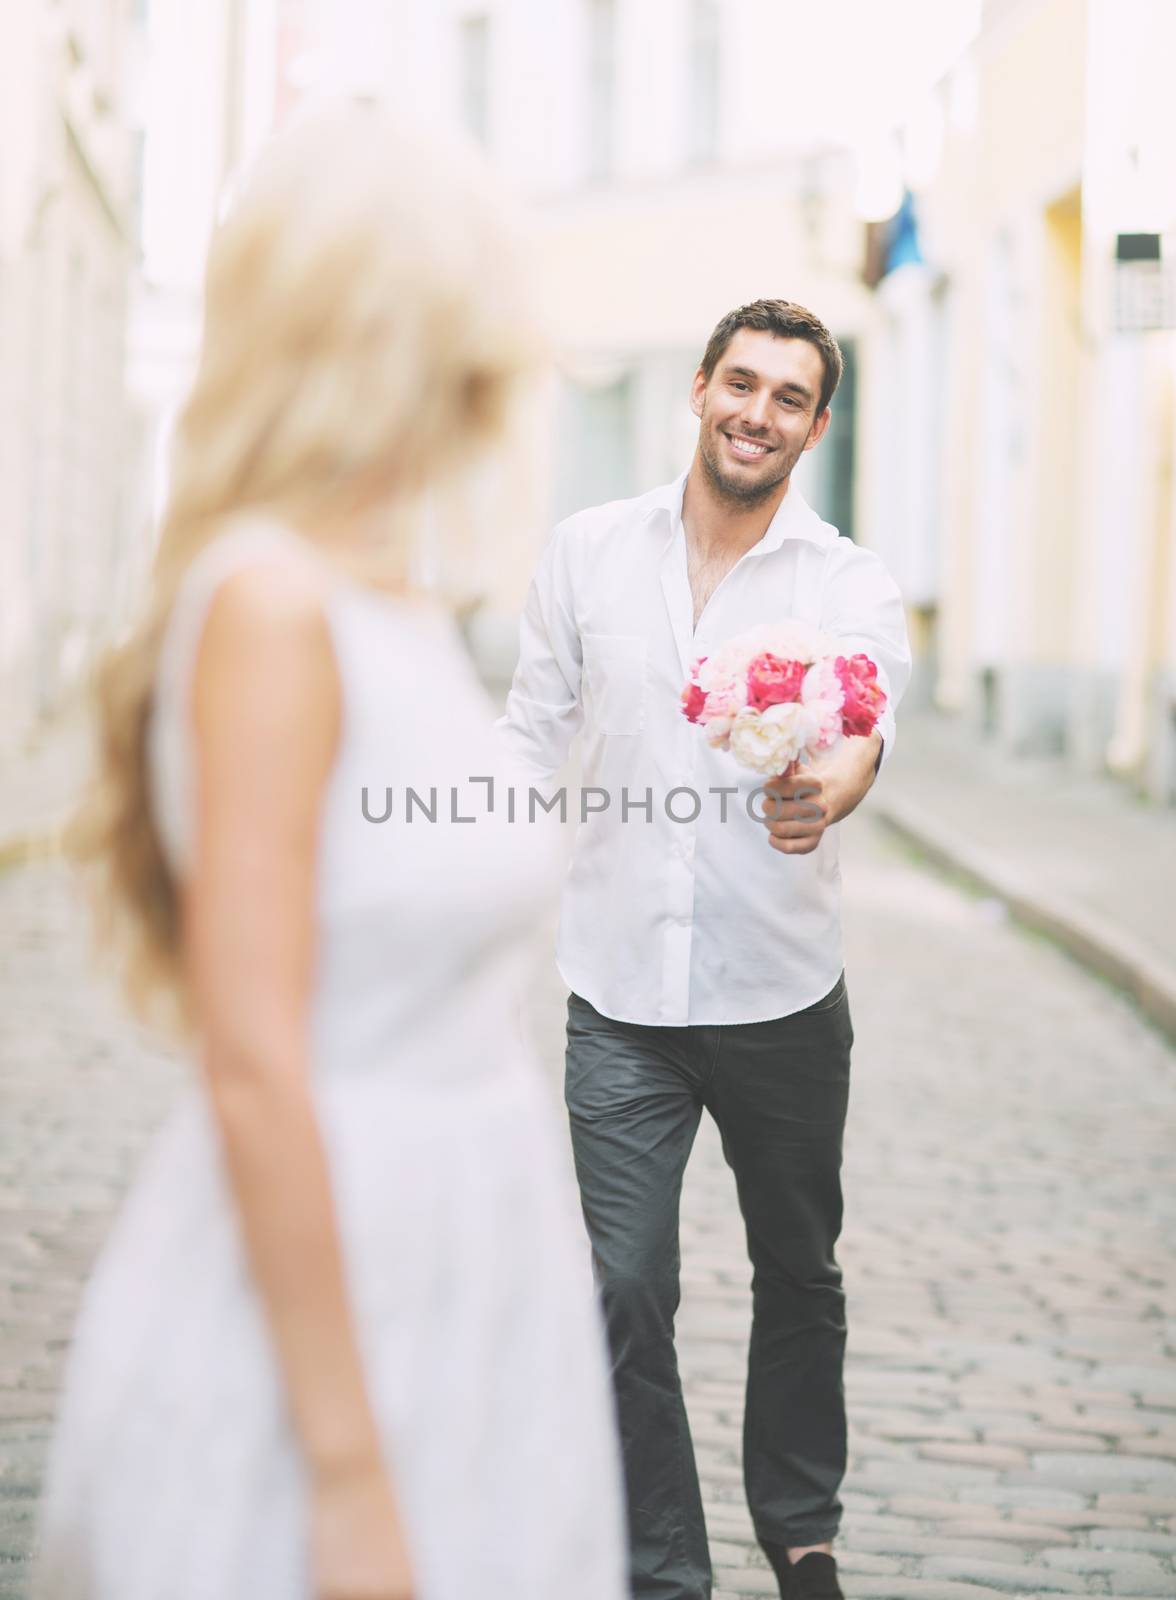 summer holidays and dating concept - couple with bouquet of flowers in the city